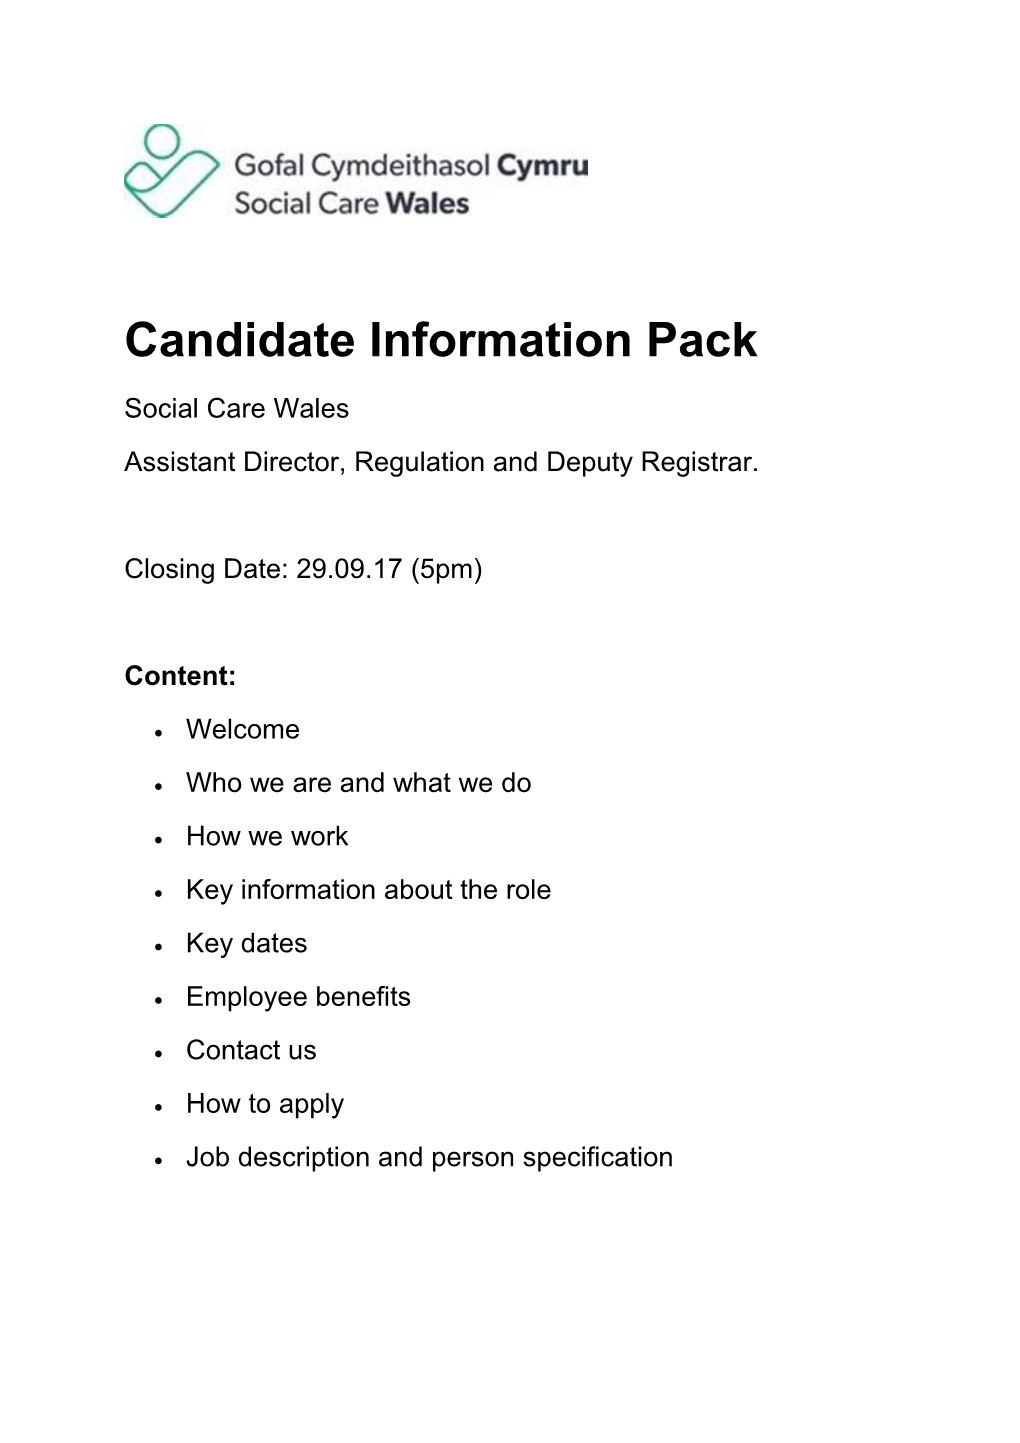 Candidate Information Pack s6